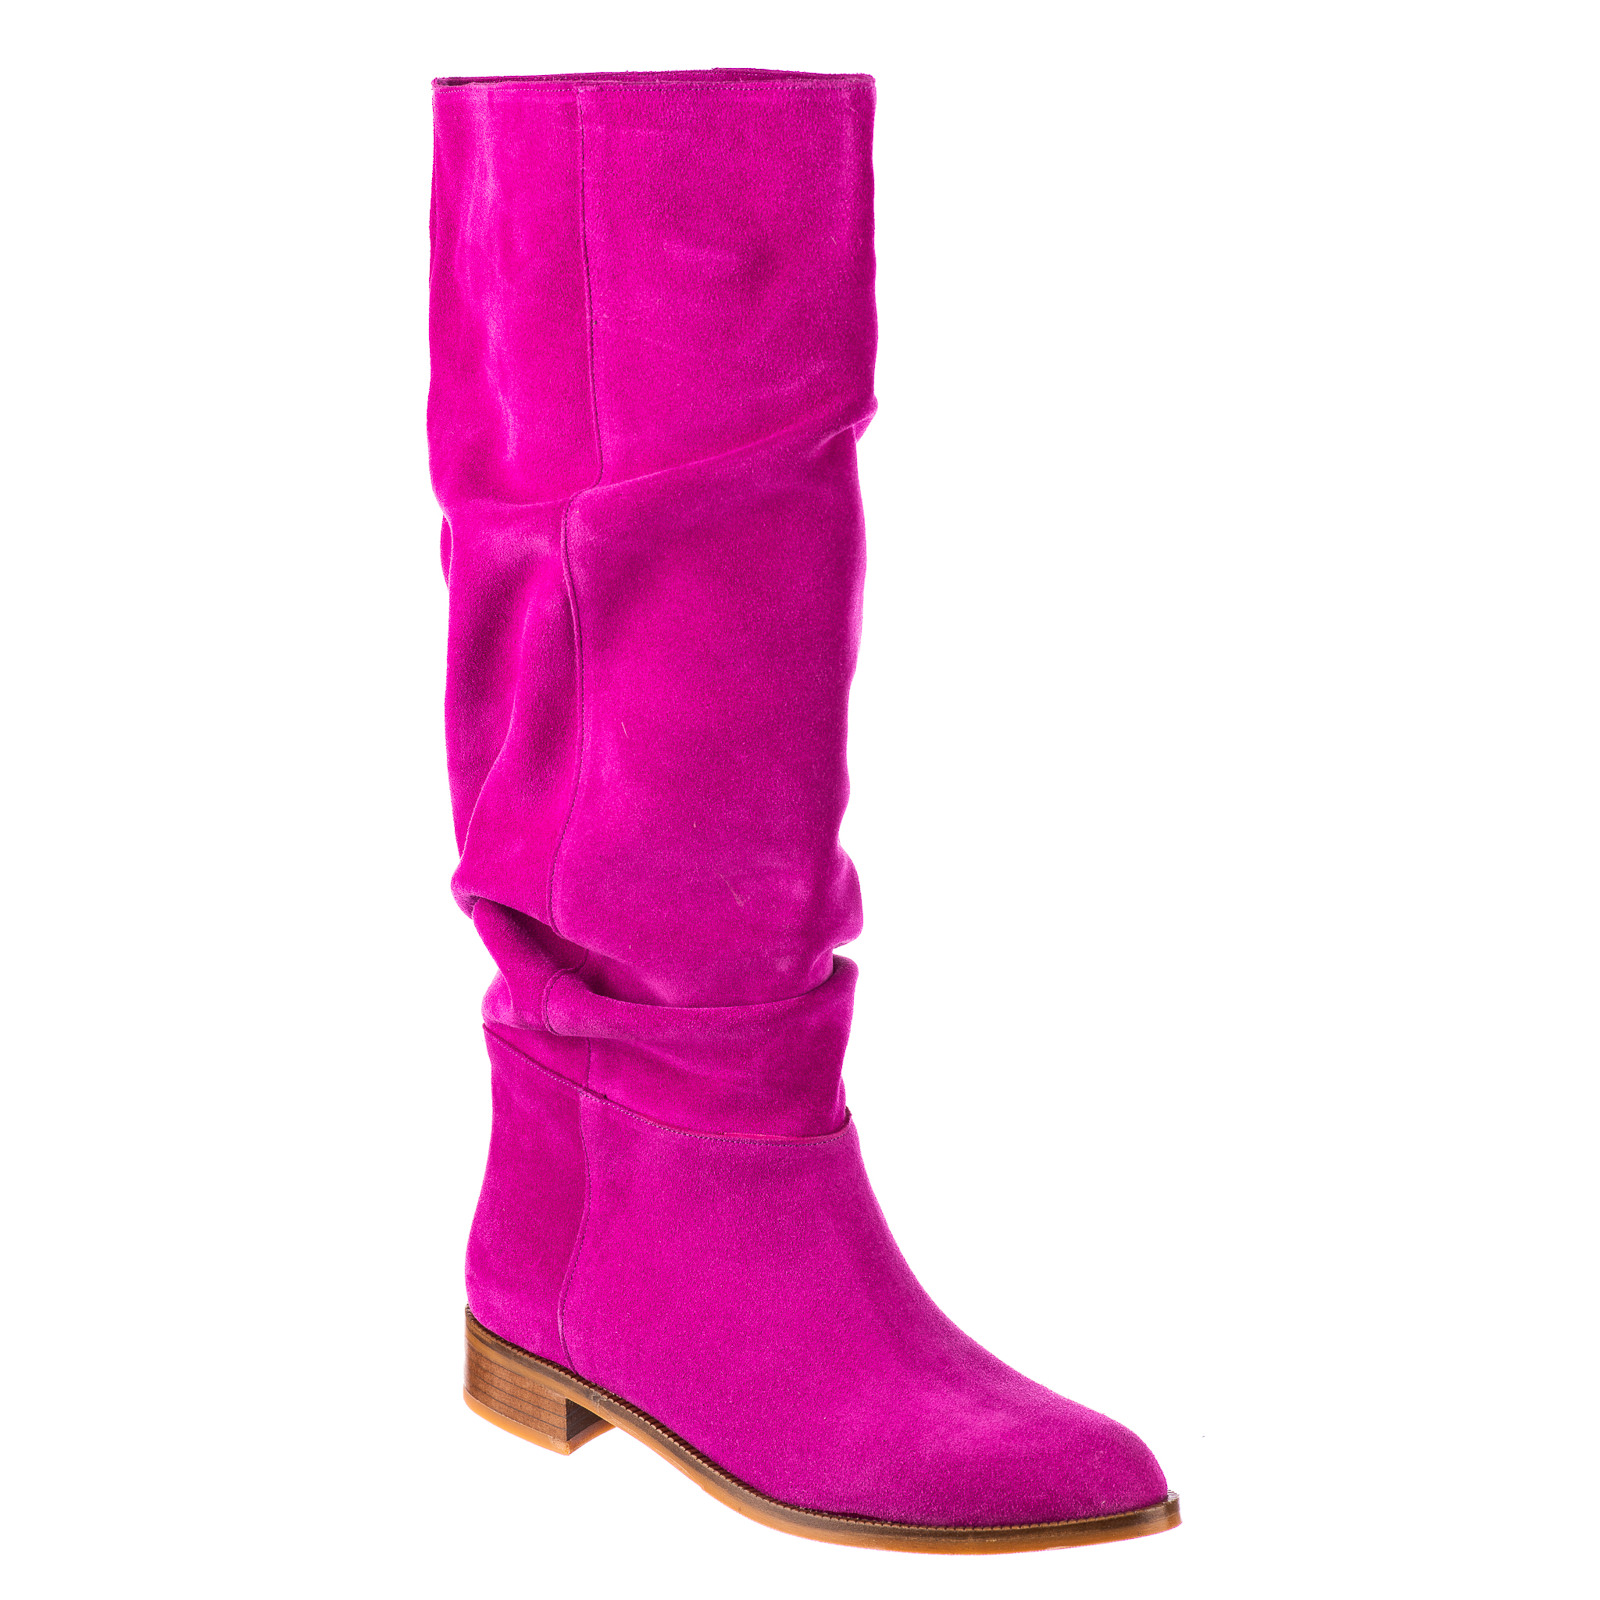 Leather boots B736 - PINK